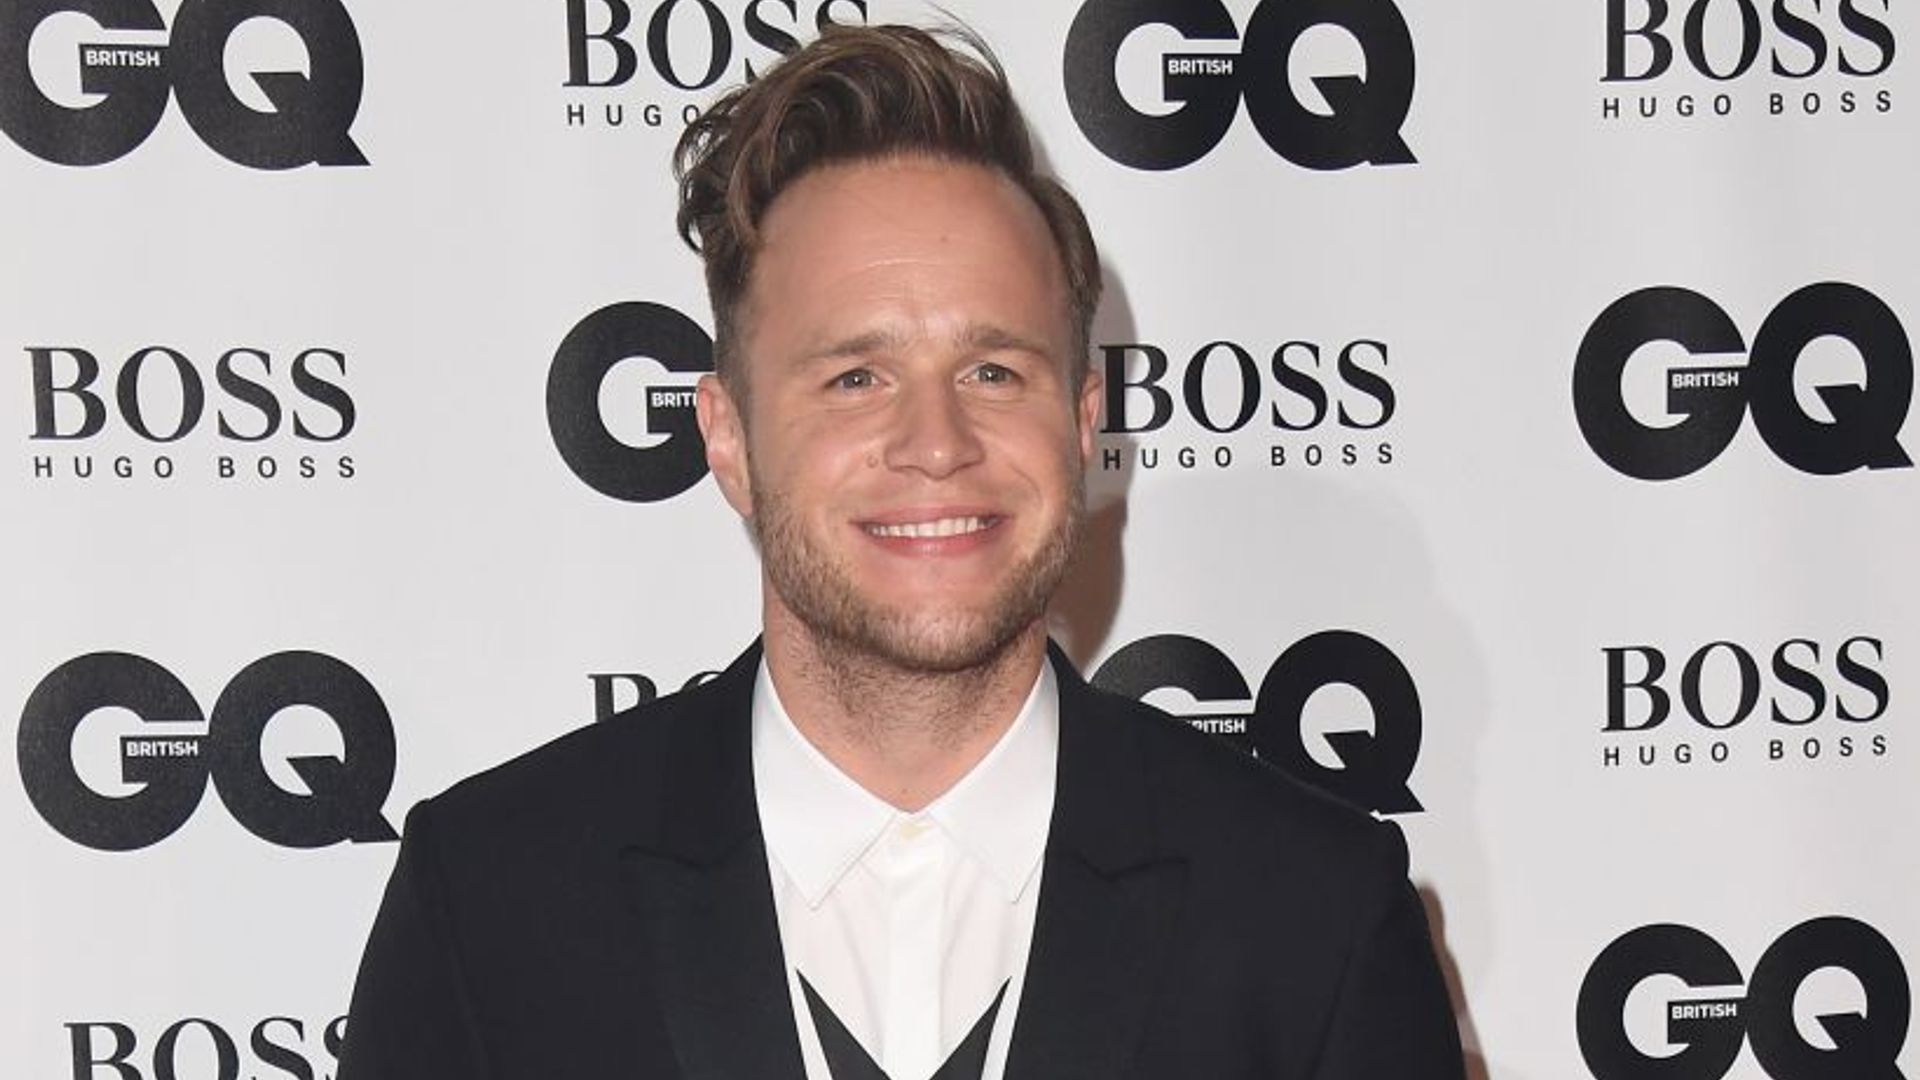 Olly-Murs-man-of-the-year-awards-red-carpet